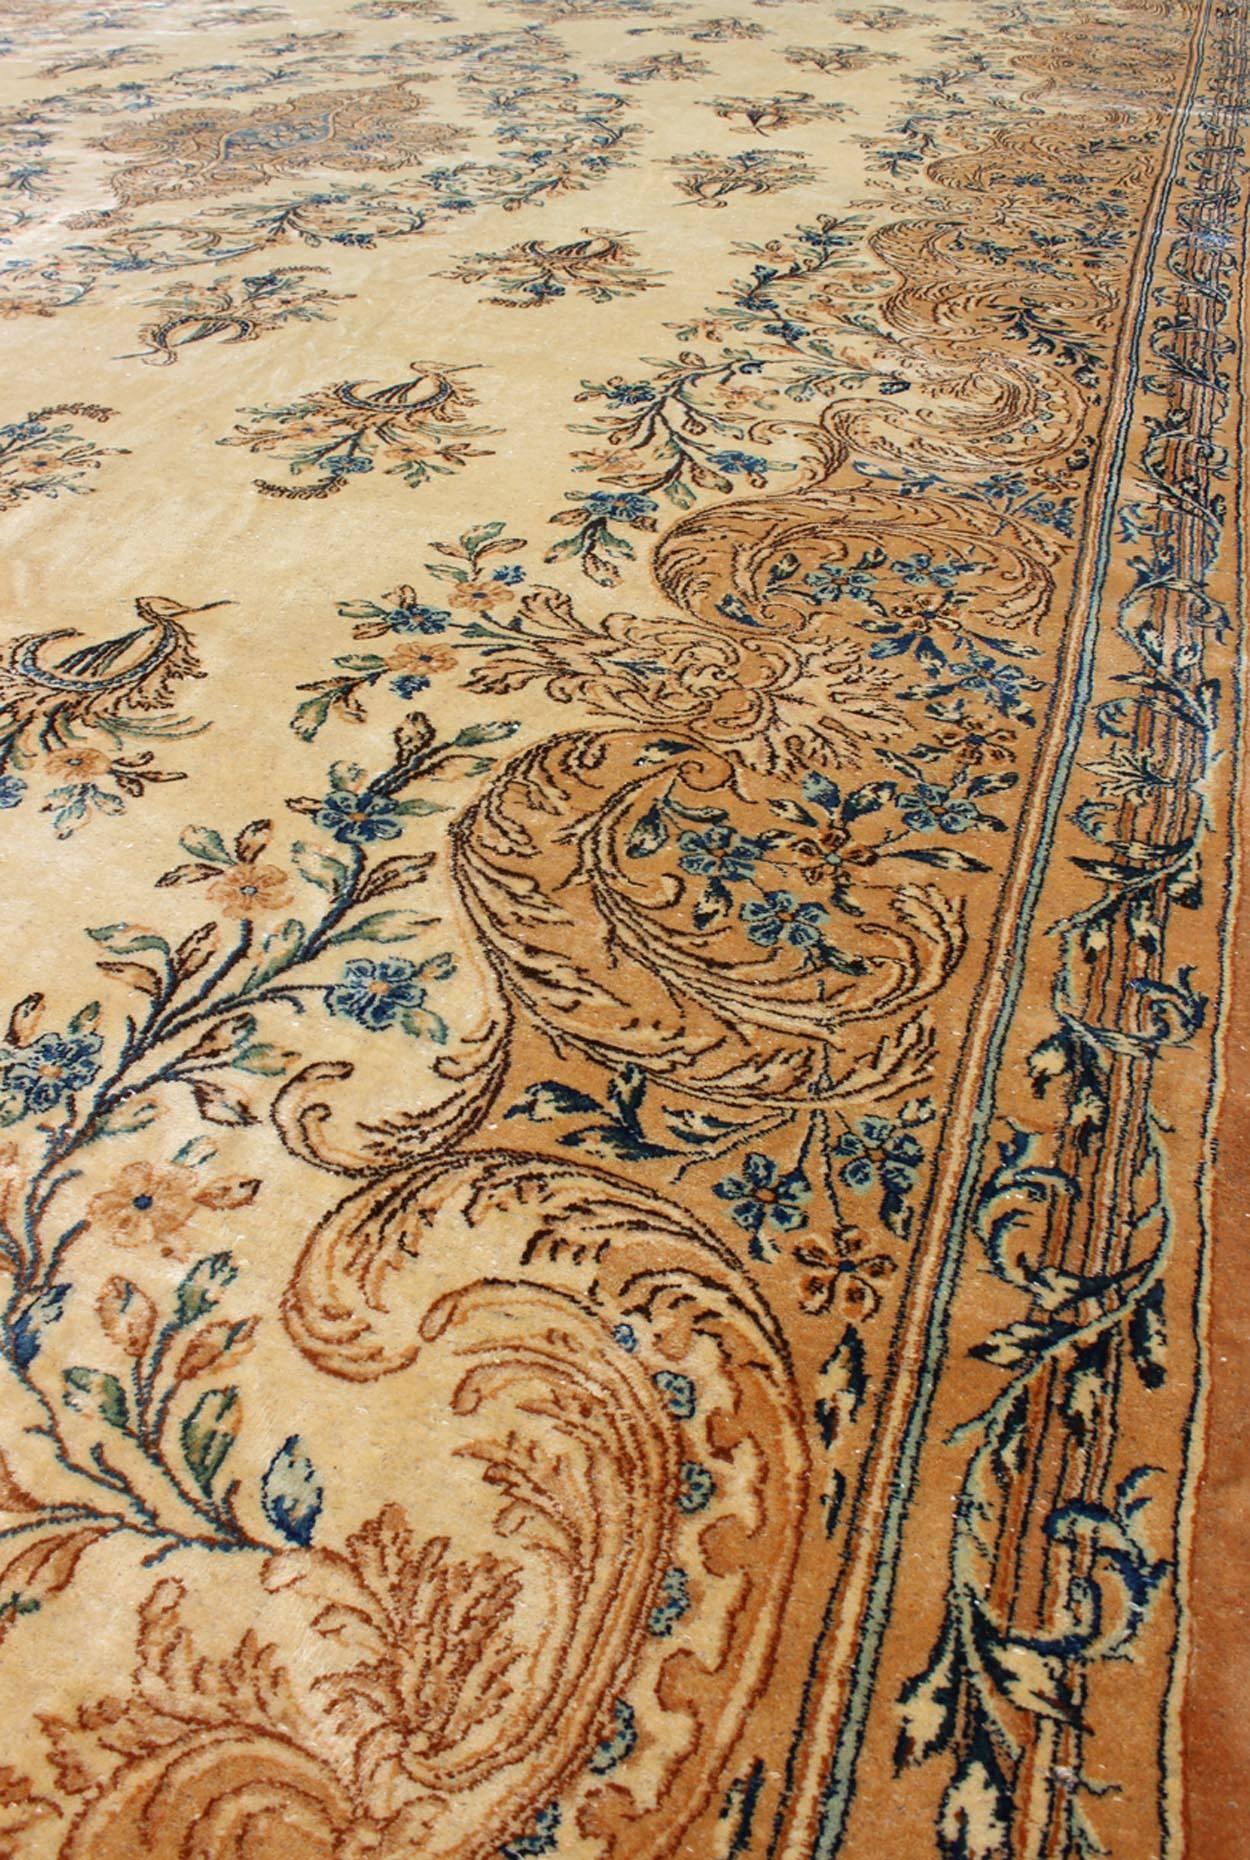 Hand-Knotted Large Antique Lavar Kerman Rug with Blossoming Floral Motifs in Cream and Blue